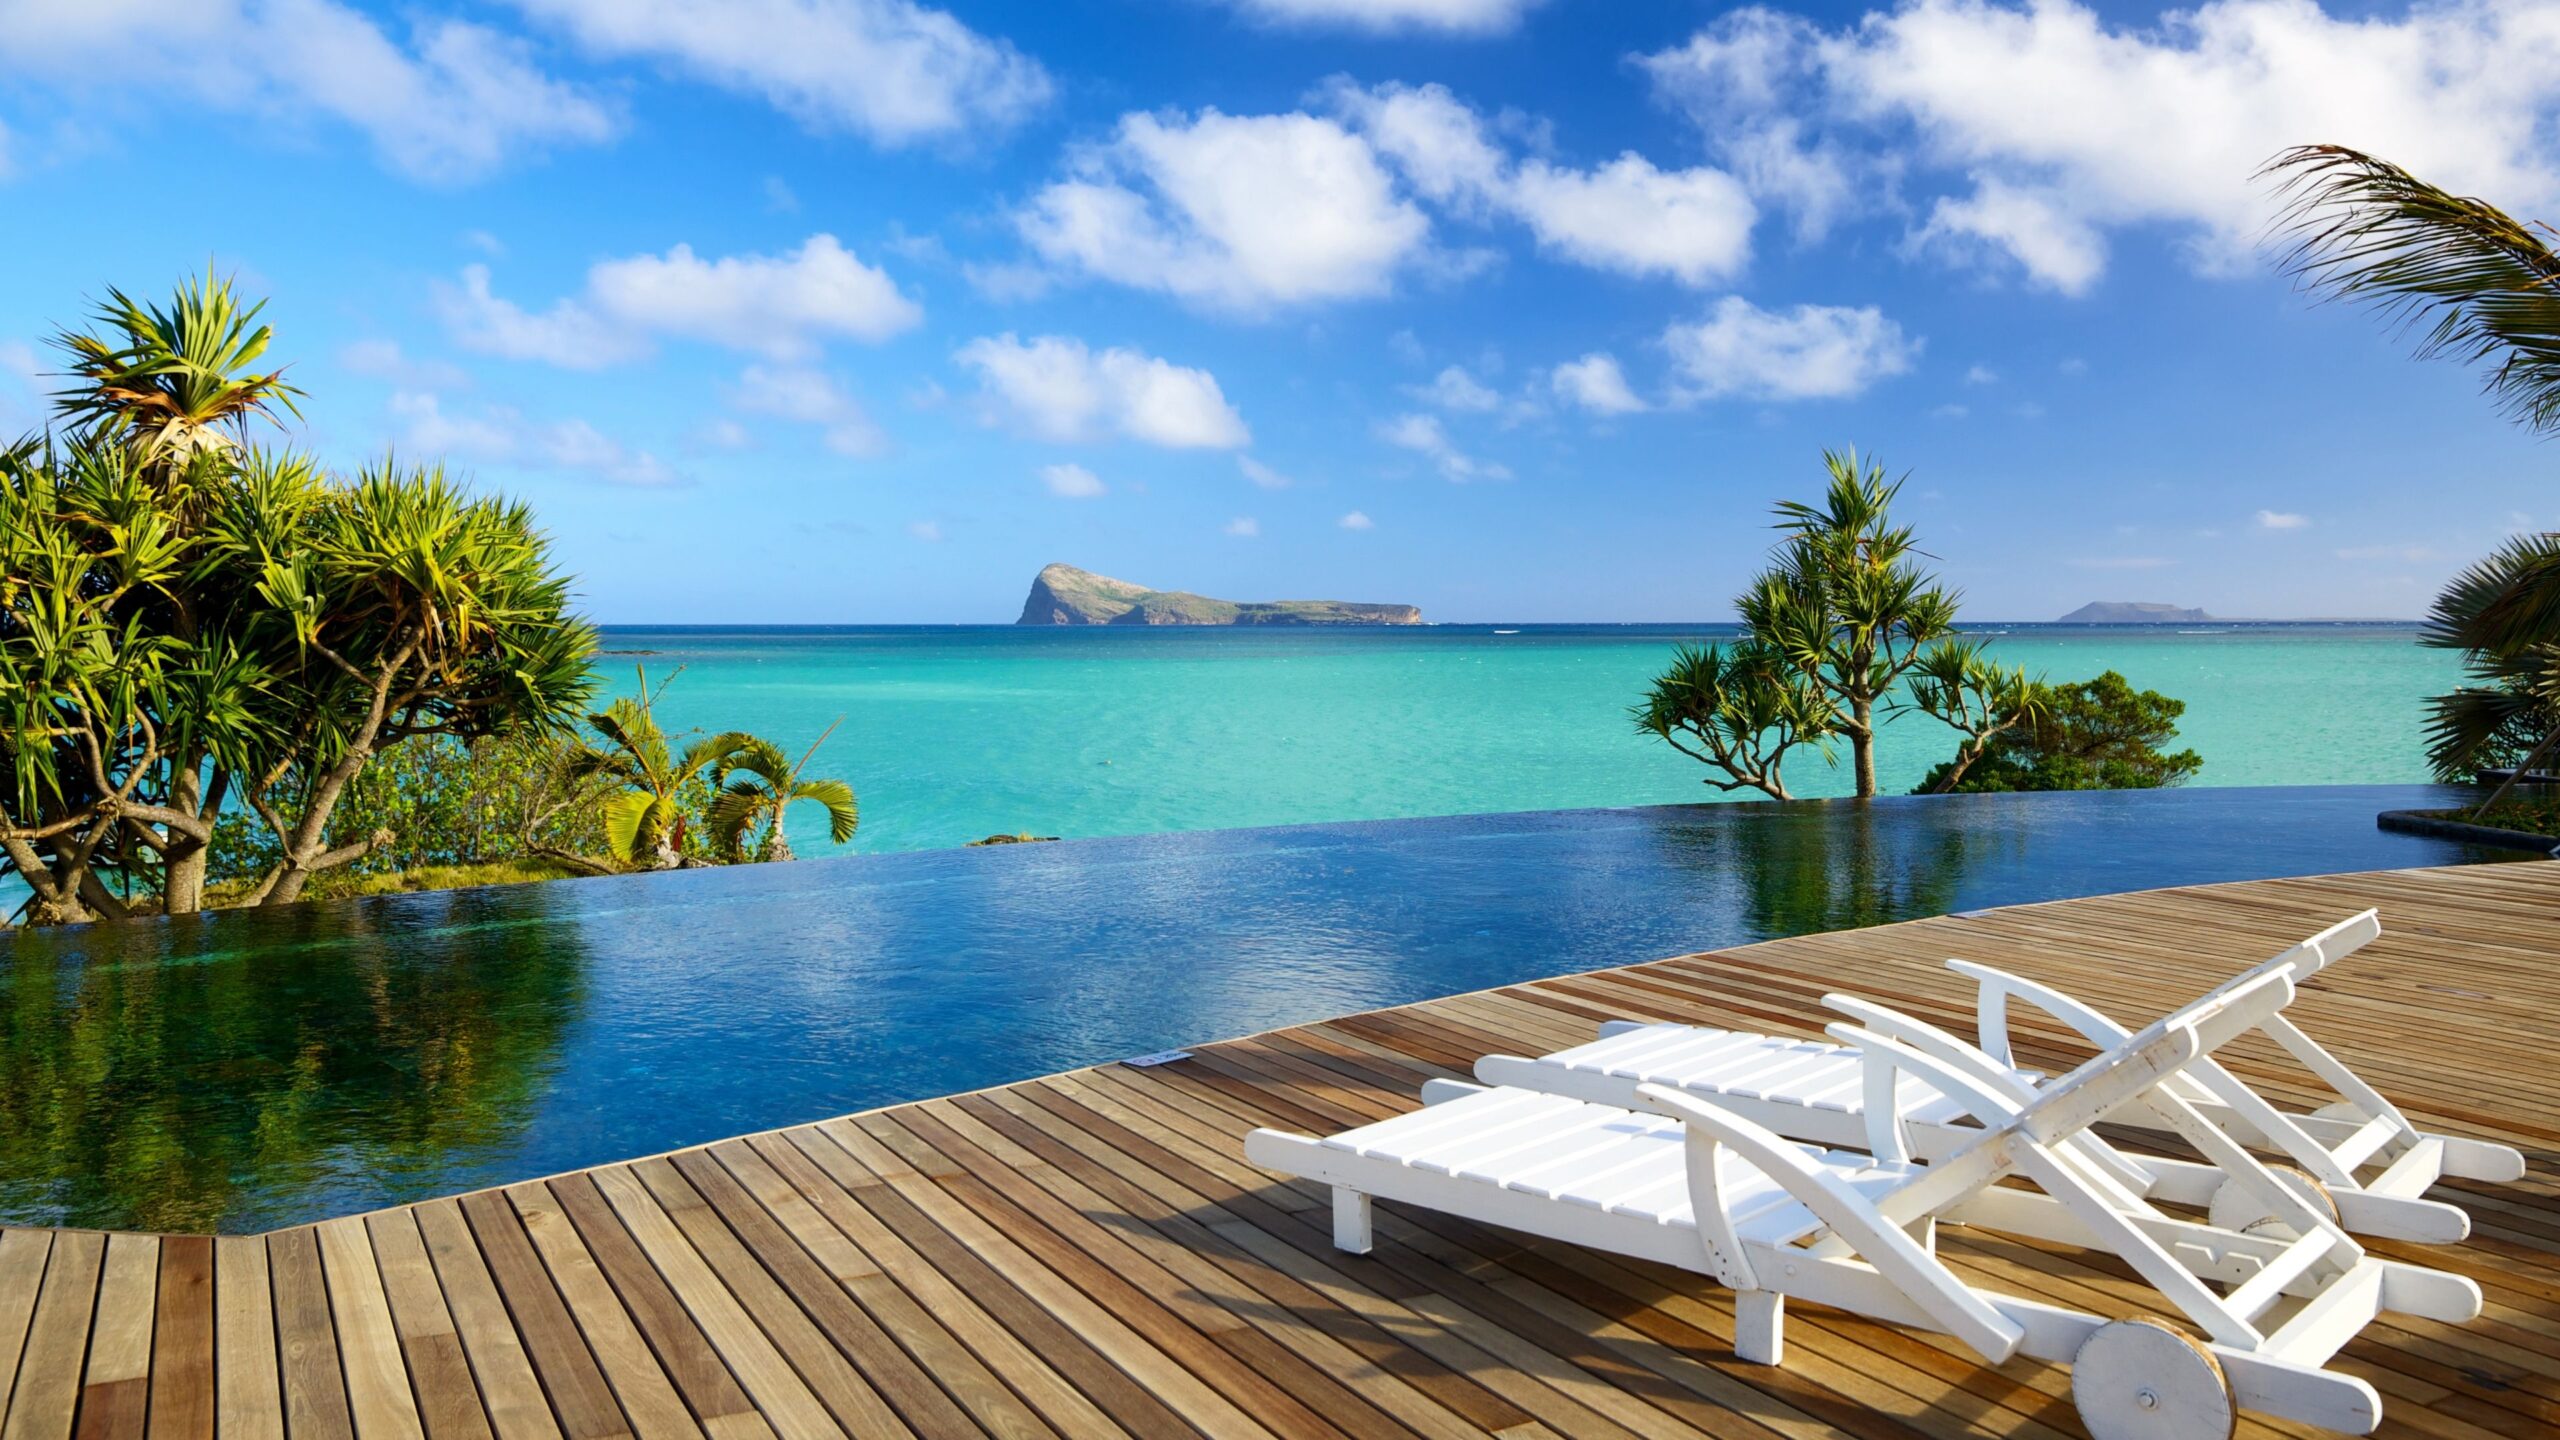 Relax in Mauritius Ultra 2K wallpapers